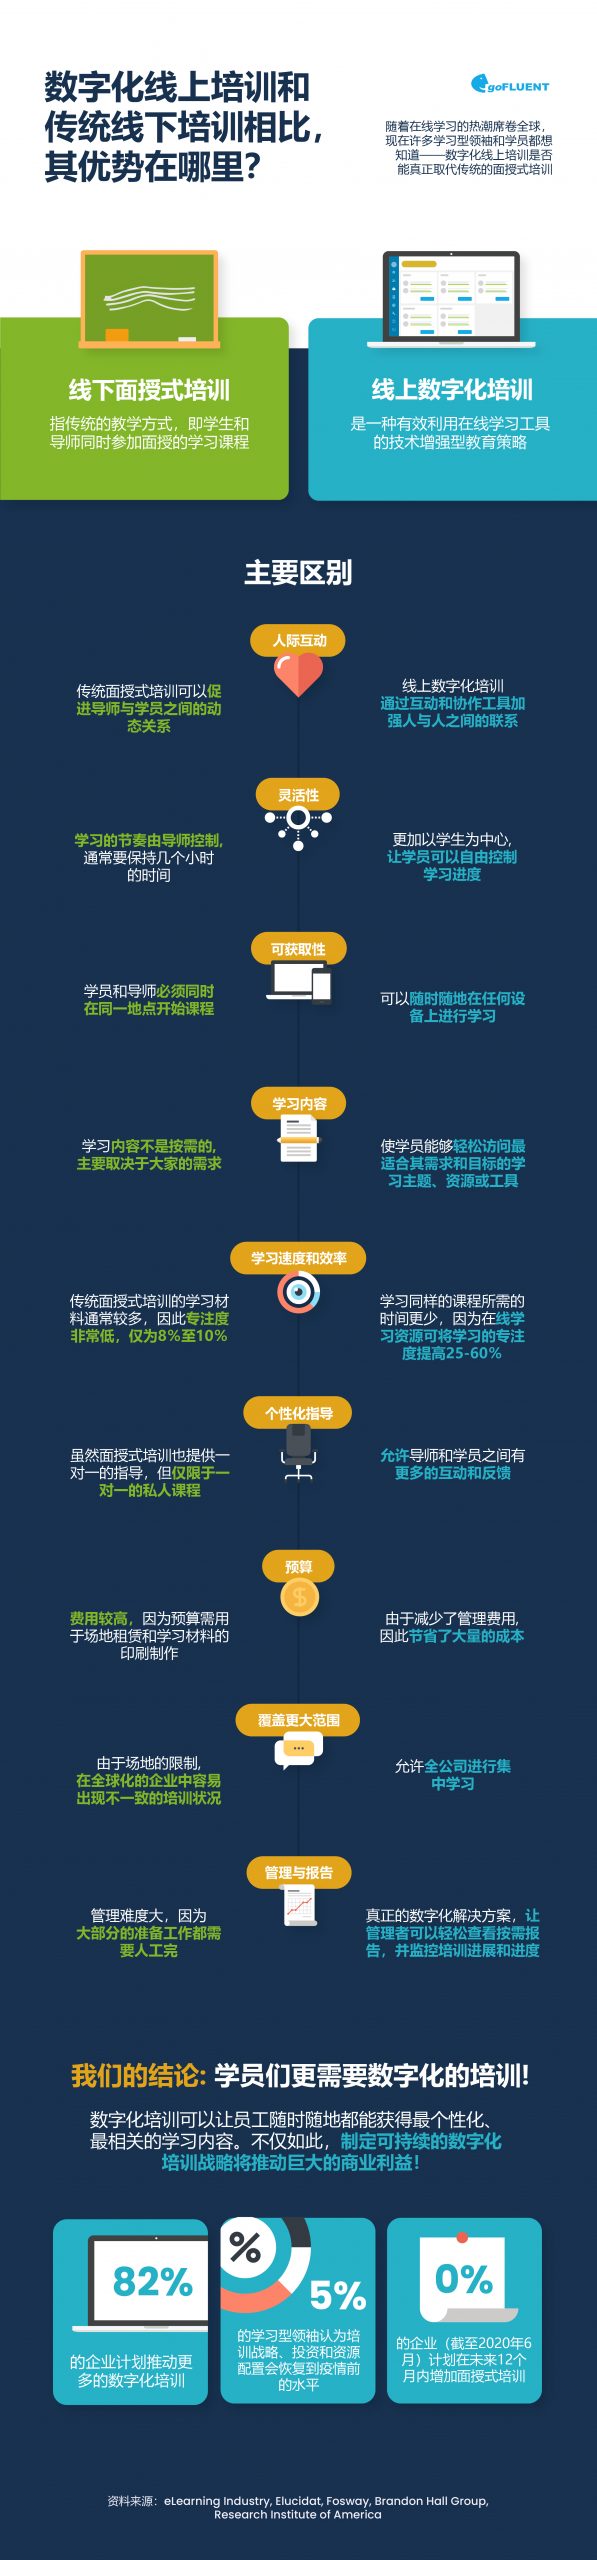 s-Digital-Learning-As-Good-As-Face-To-Face-Learning_CN_Infographic